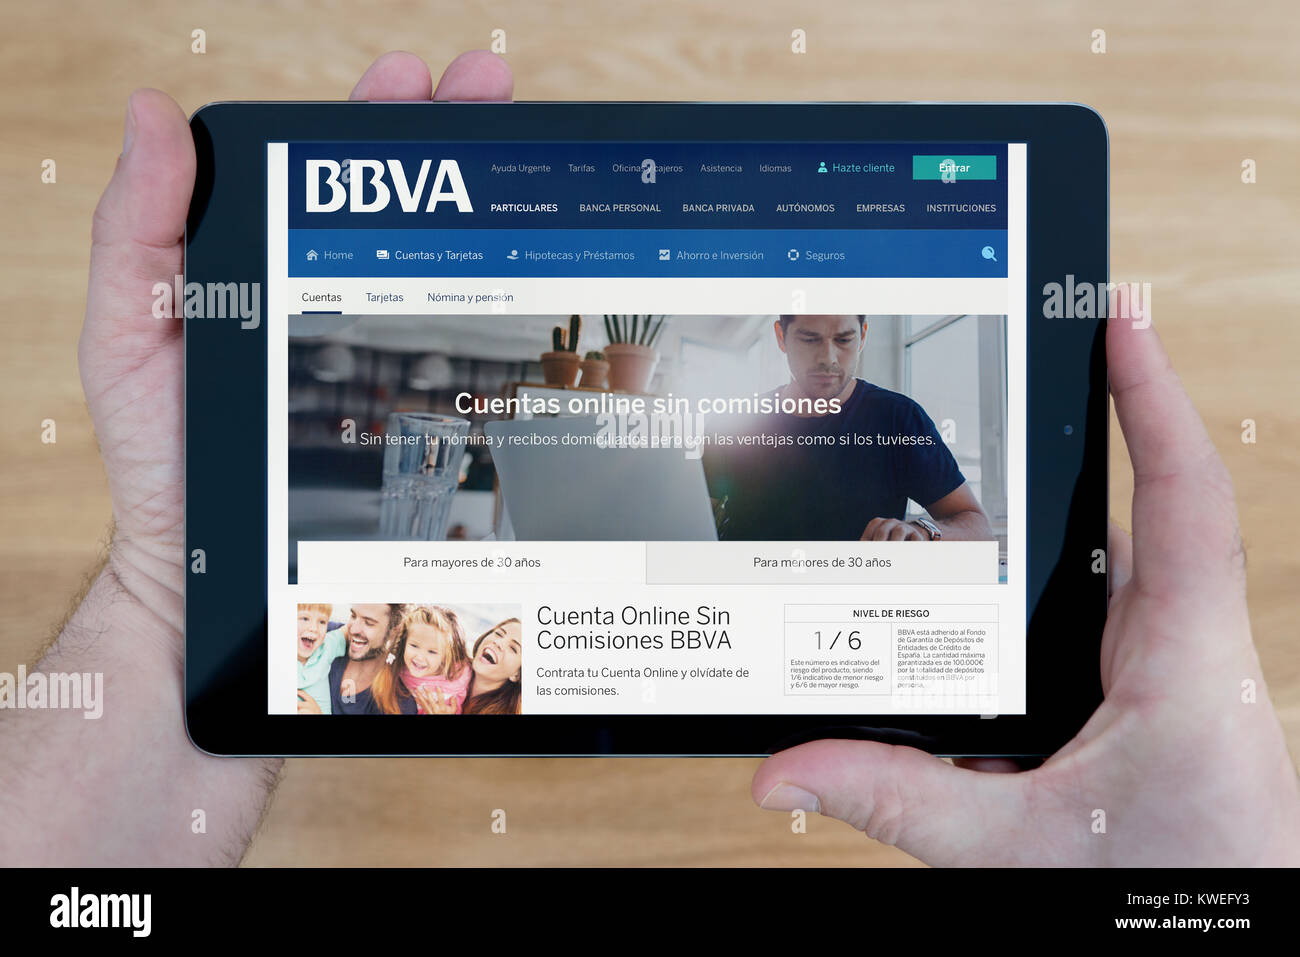 A man looks at the Banco Bilbao Vizcaya Argentaria (BBVA) website on his iPad tablet device, over a wooden table top background (Editorial use only) Stock Photo